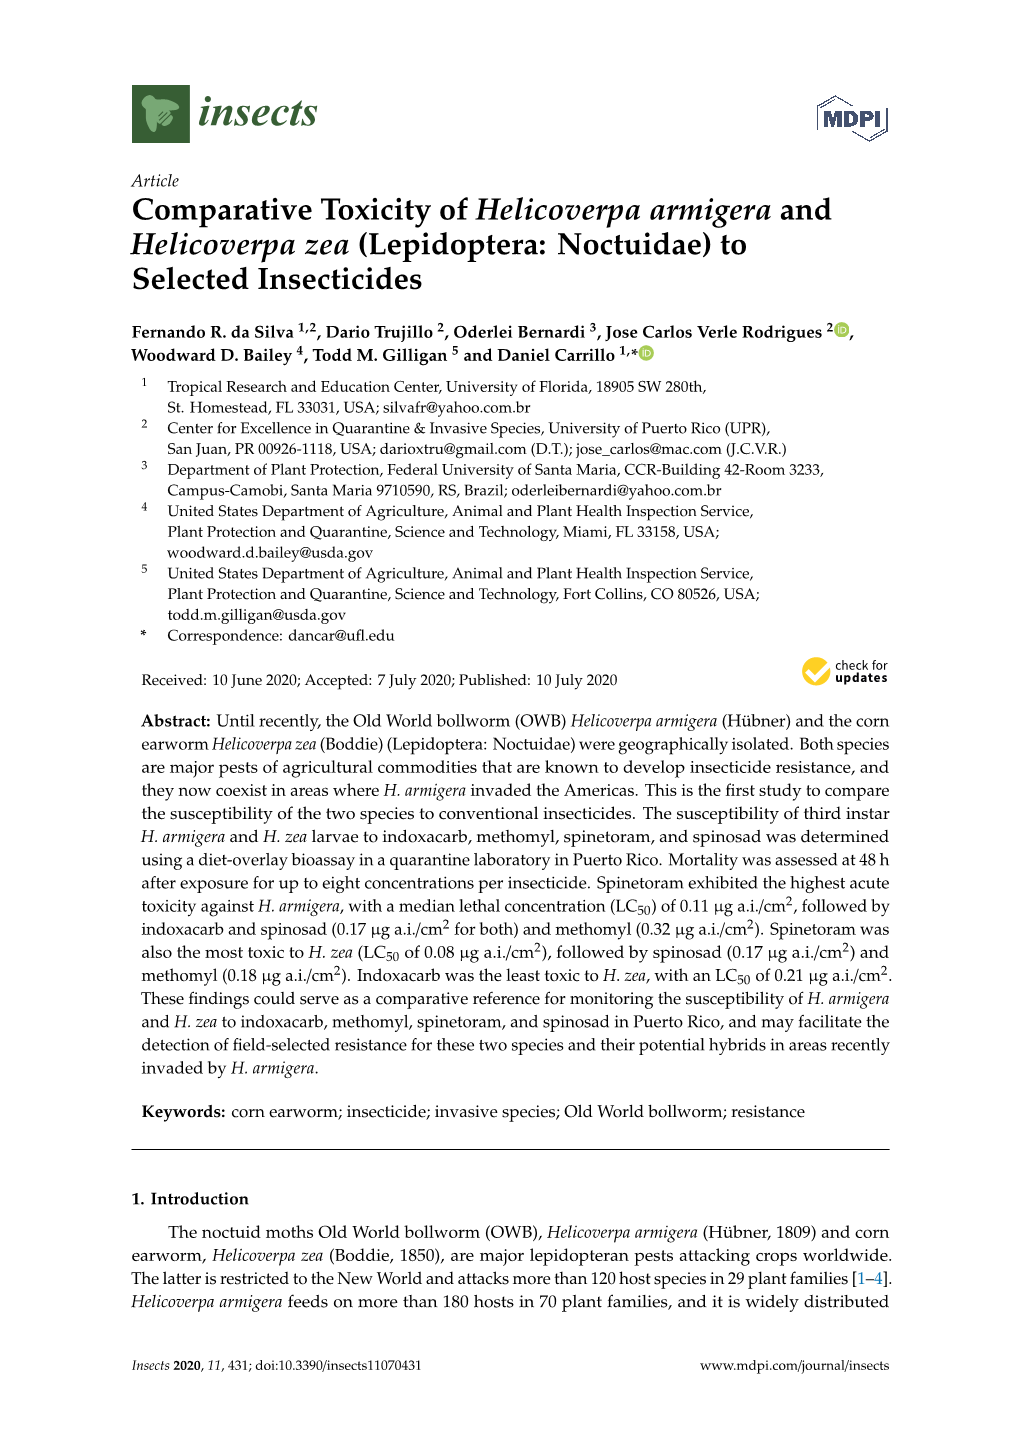 Comparative Toxicity of Helicoverpa Armigera and Helicoverpa Zea (Lepidoptera: Noctuidae) to Selected Insecticides